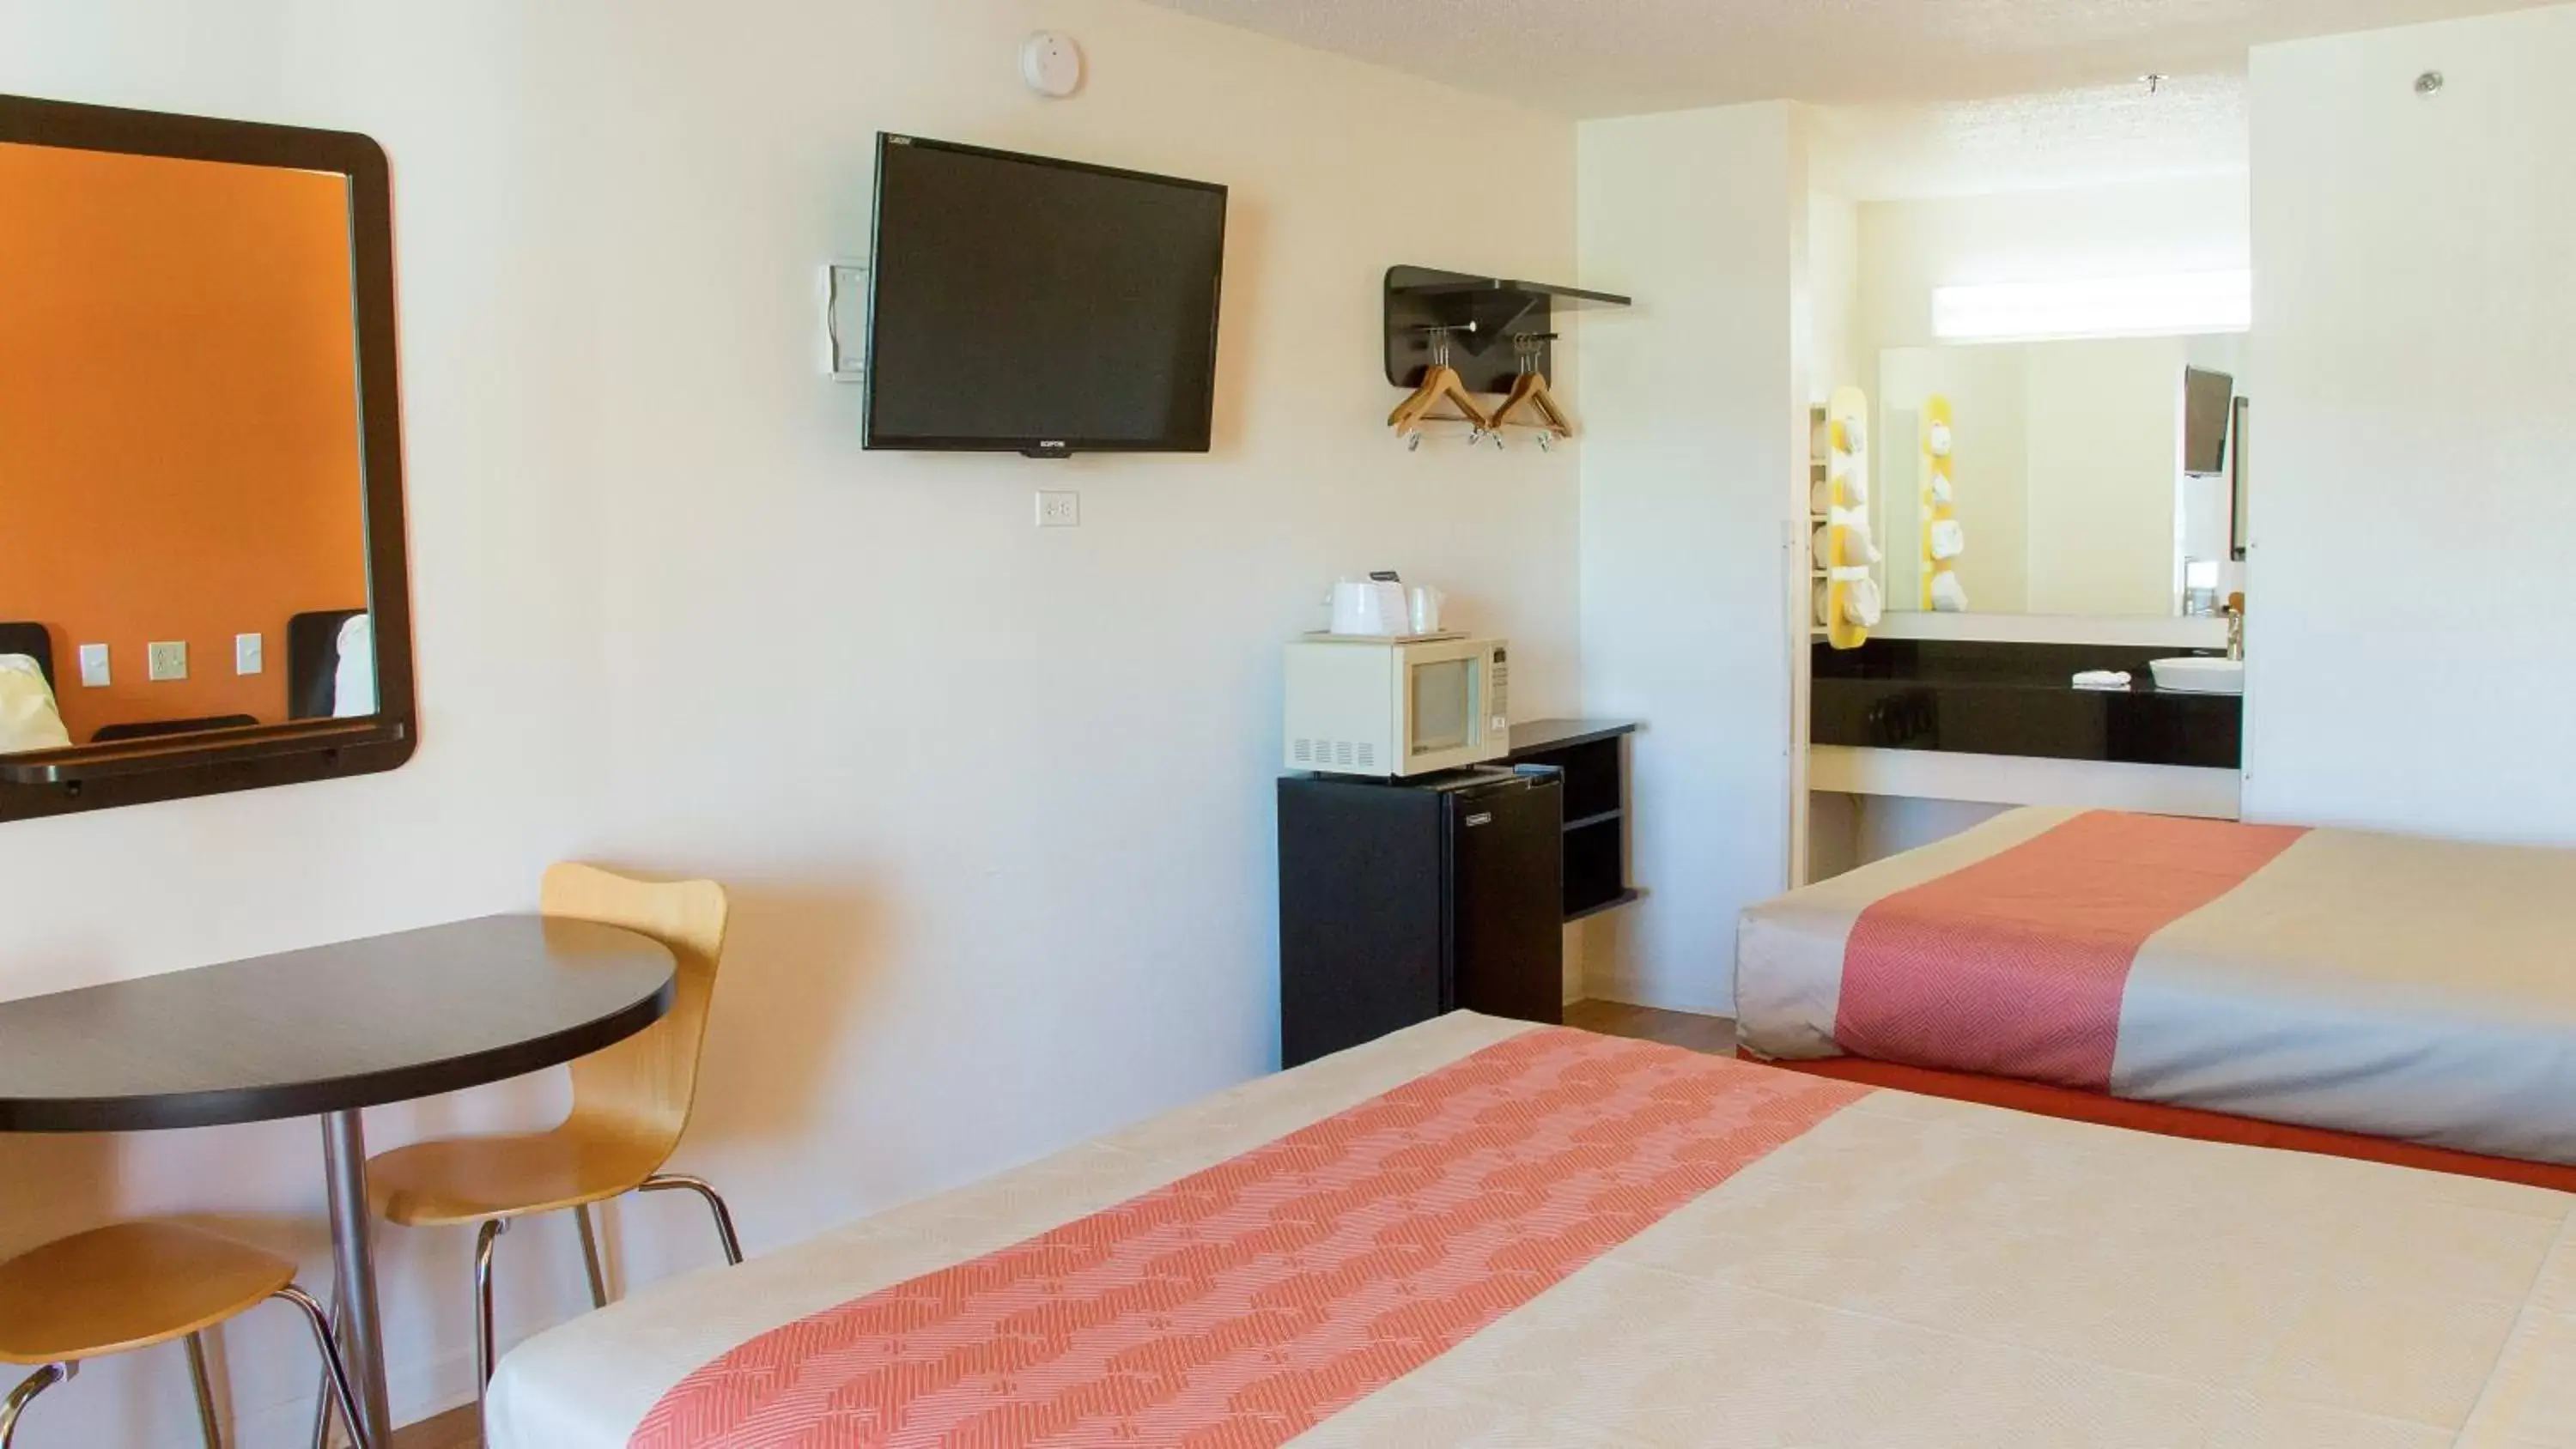 Bedroom, Room Photo in Motel 6-Cookeville, TN